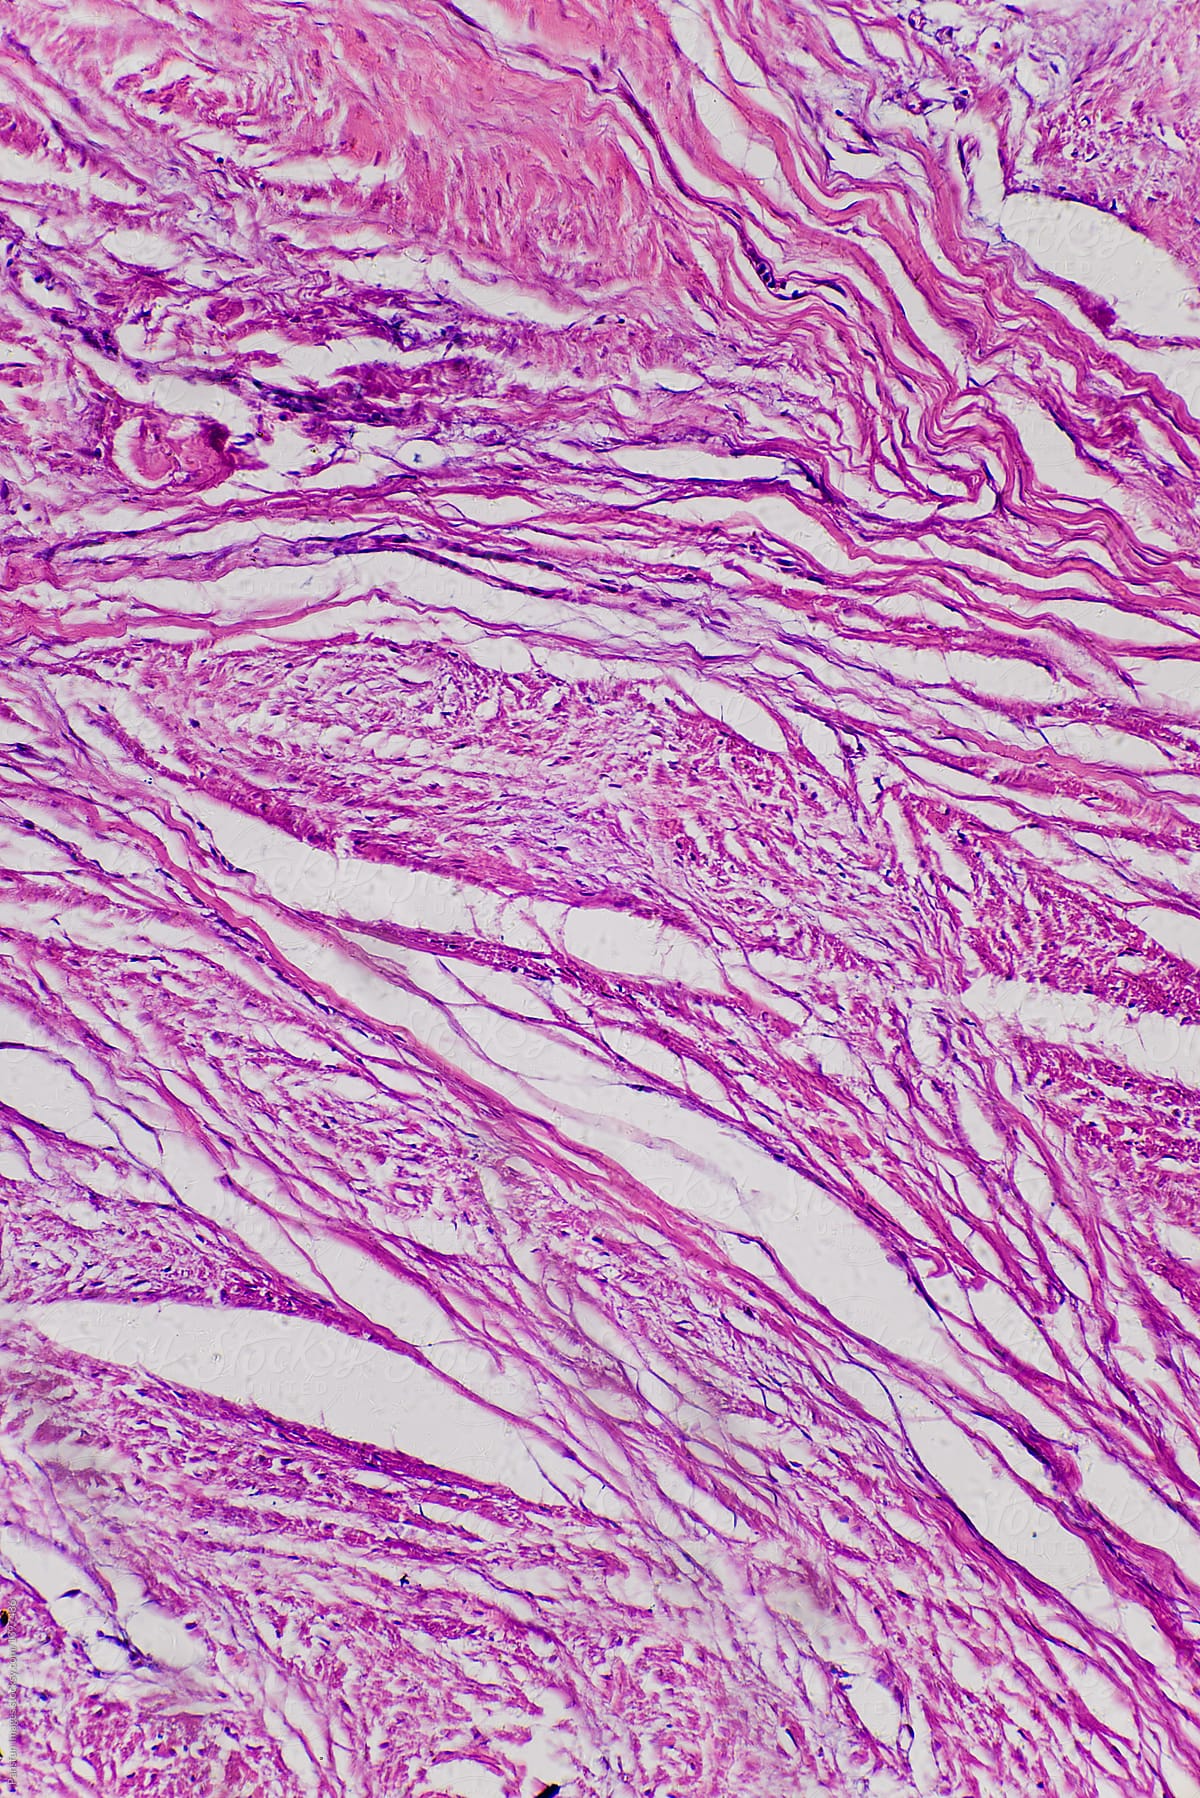 Connective tissue hyaline degeneration of human